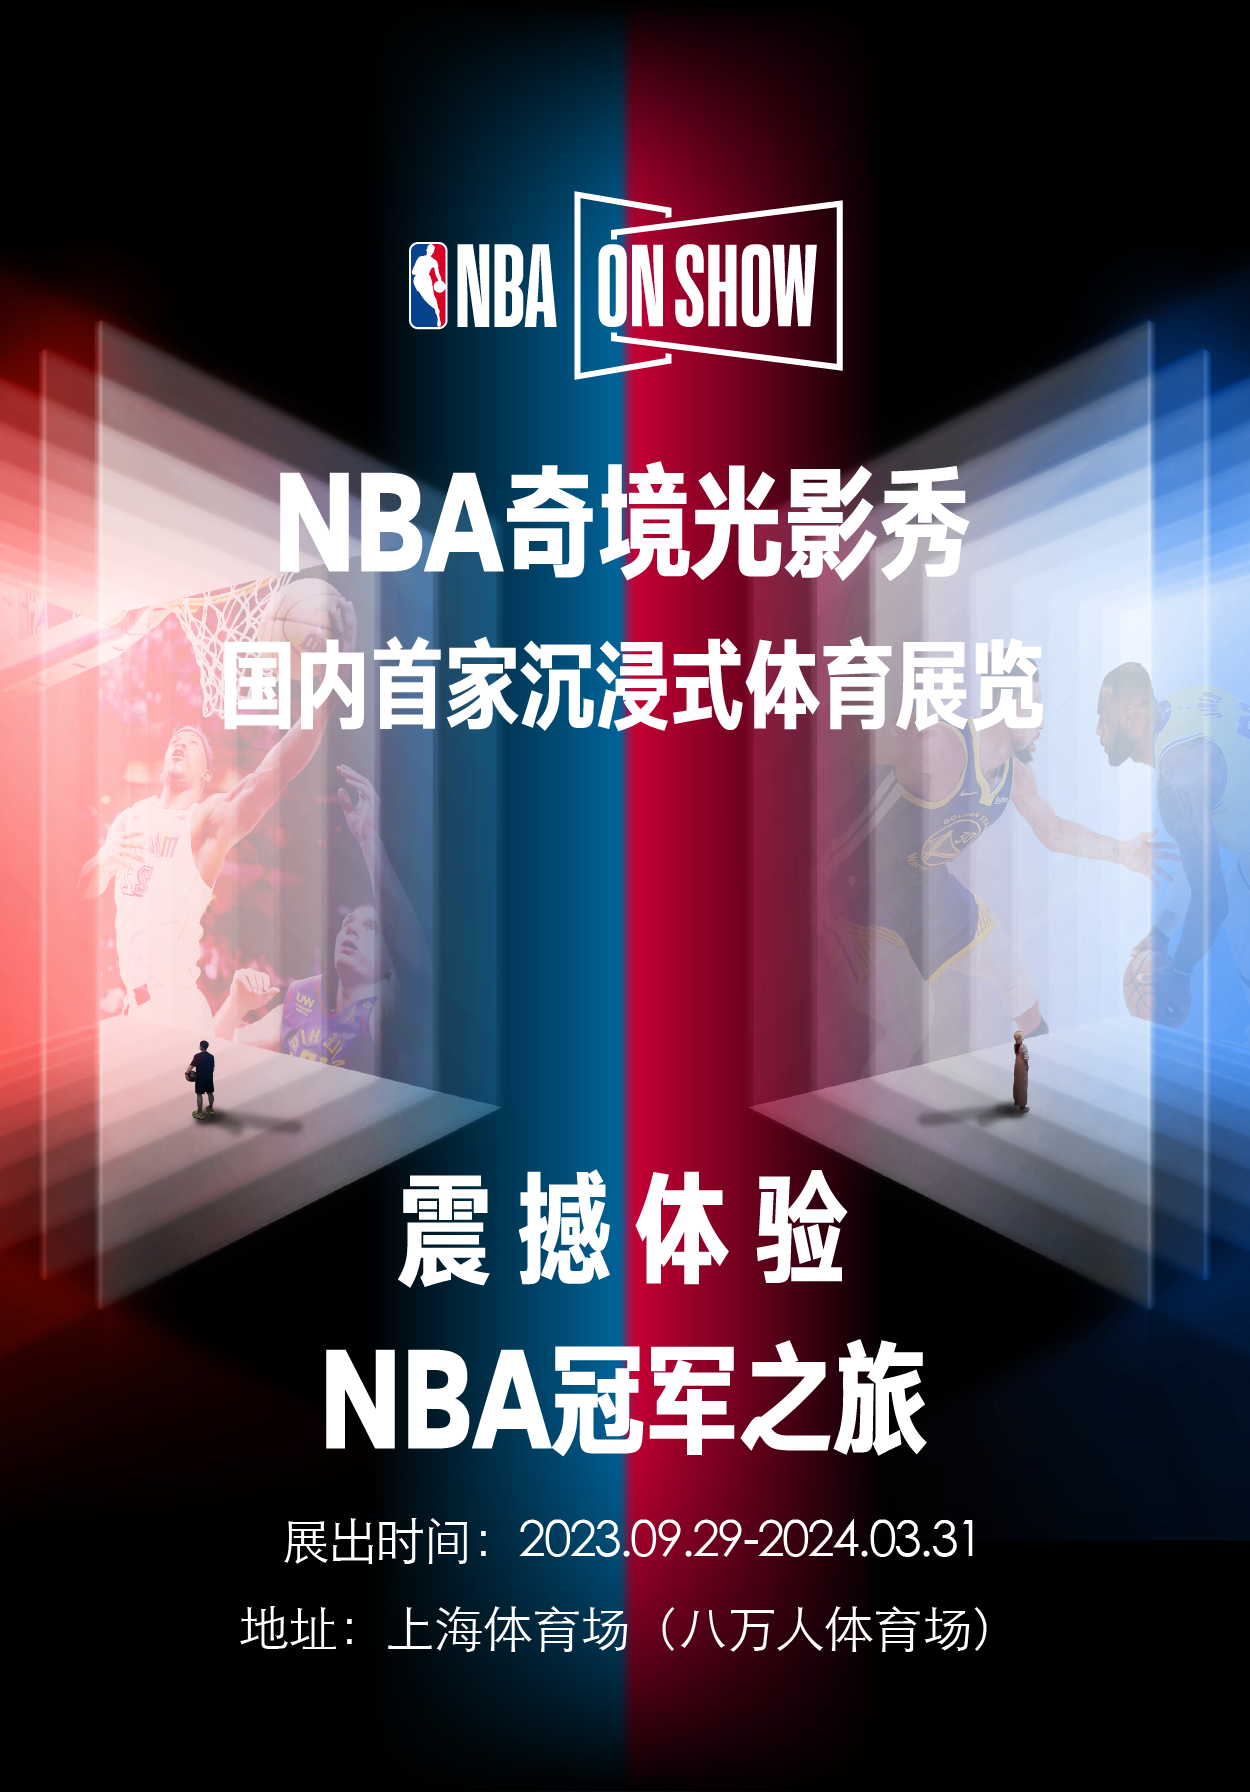 【Closed on July 8-11】NBA ON SHOW｜ Immersive Light Projection Show｜World Debut